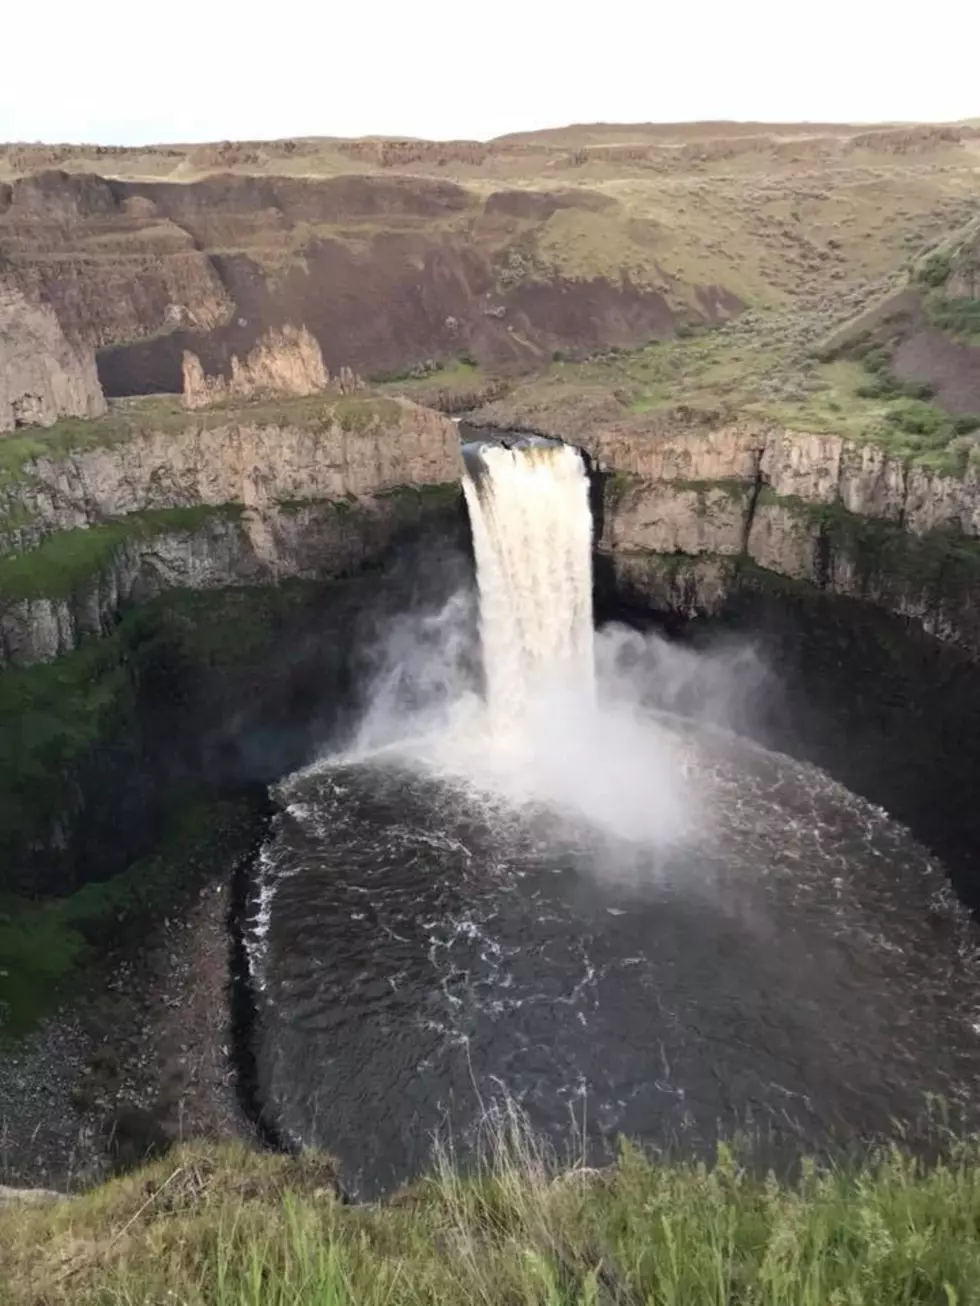 Search Called Off for Missing Palouse Falls Swimmer, Believed Drowned